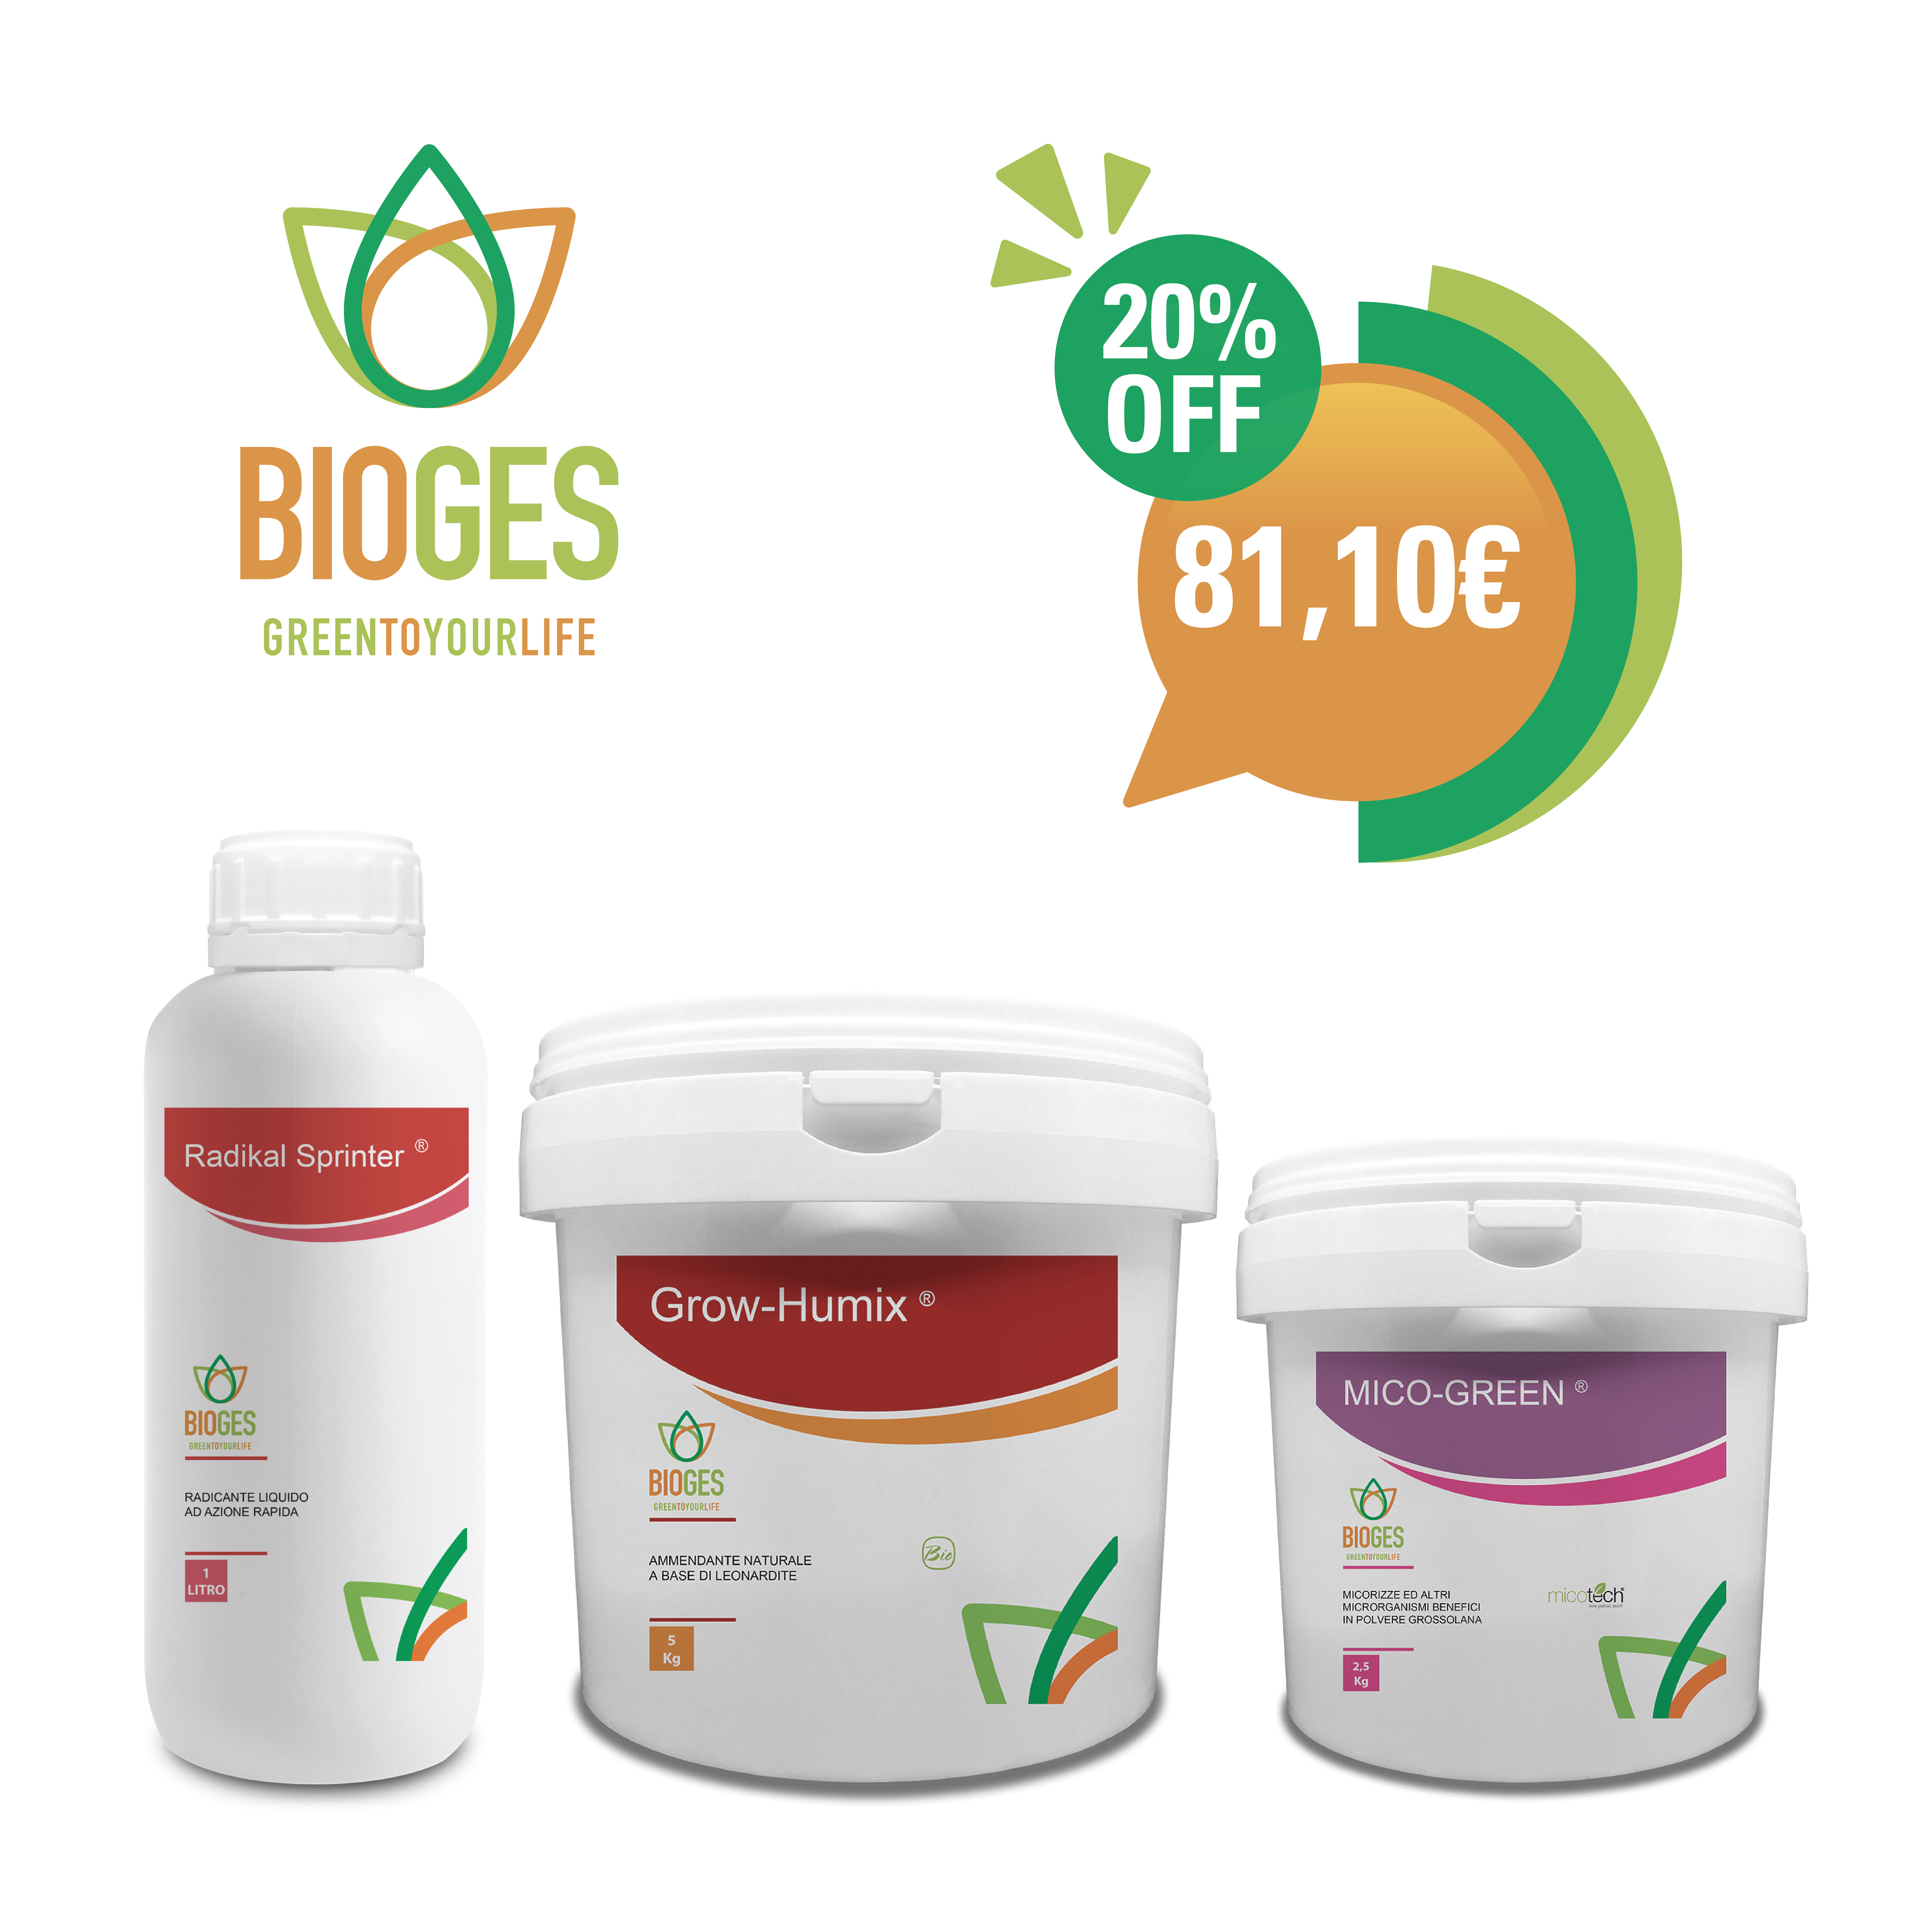 Kit rinvaso concime Bioges - Rinvaso Bonsai - Offerta Speciale - Grow-Humix (...